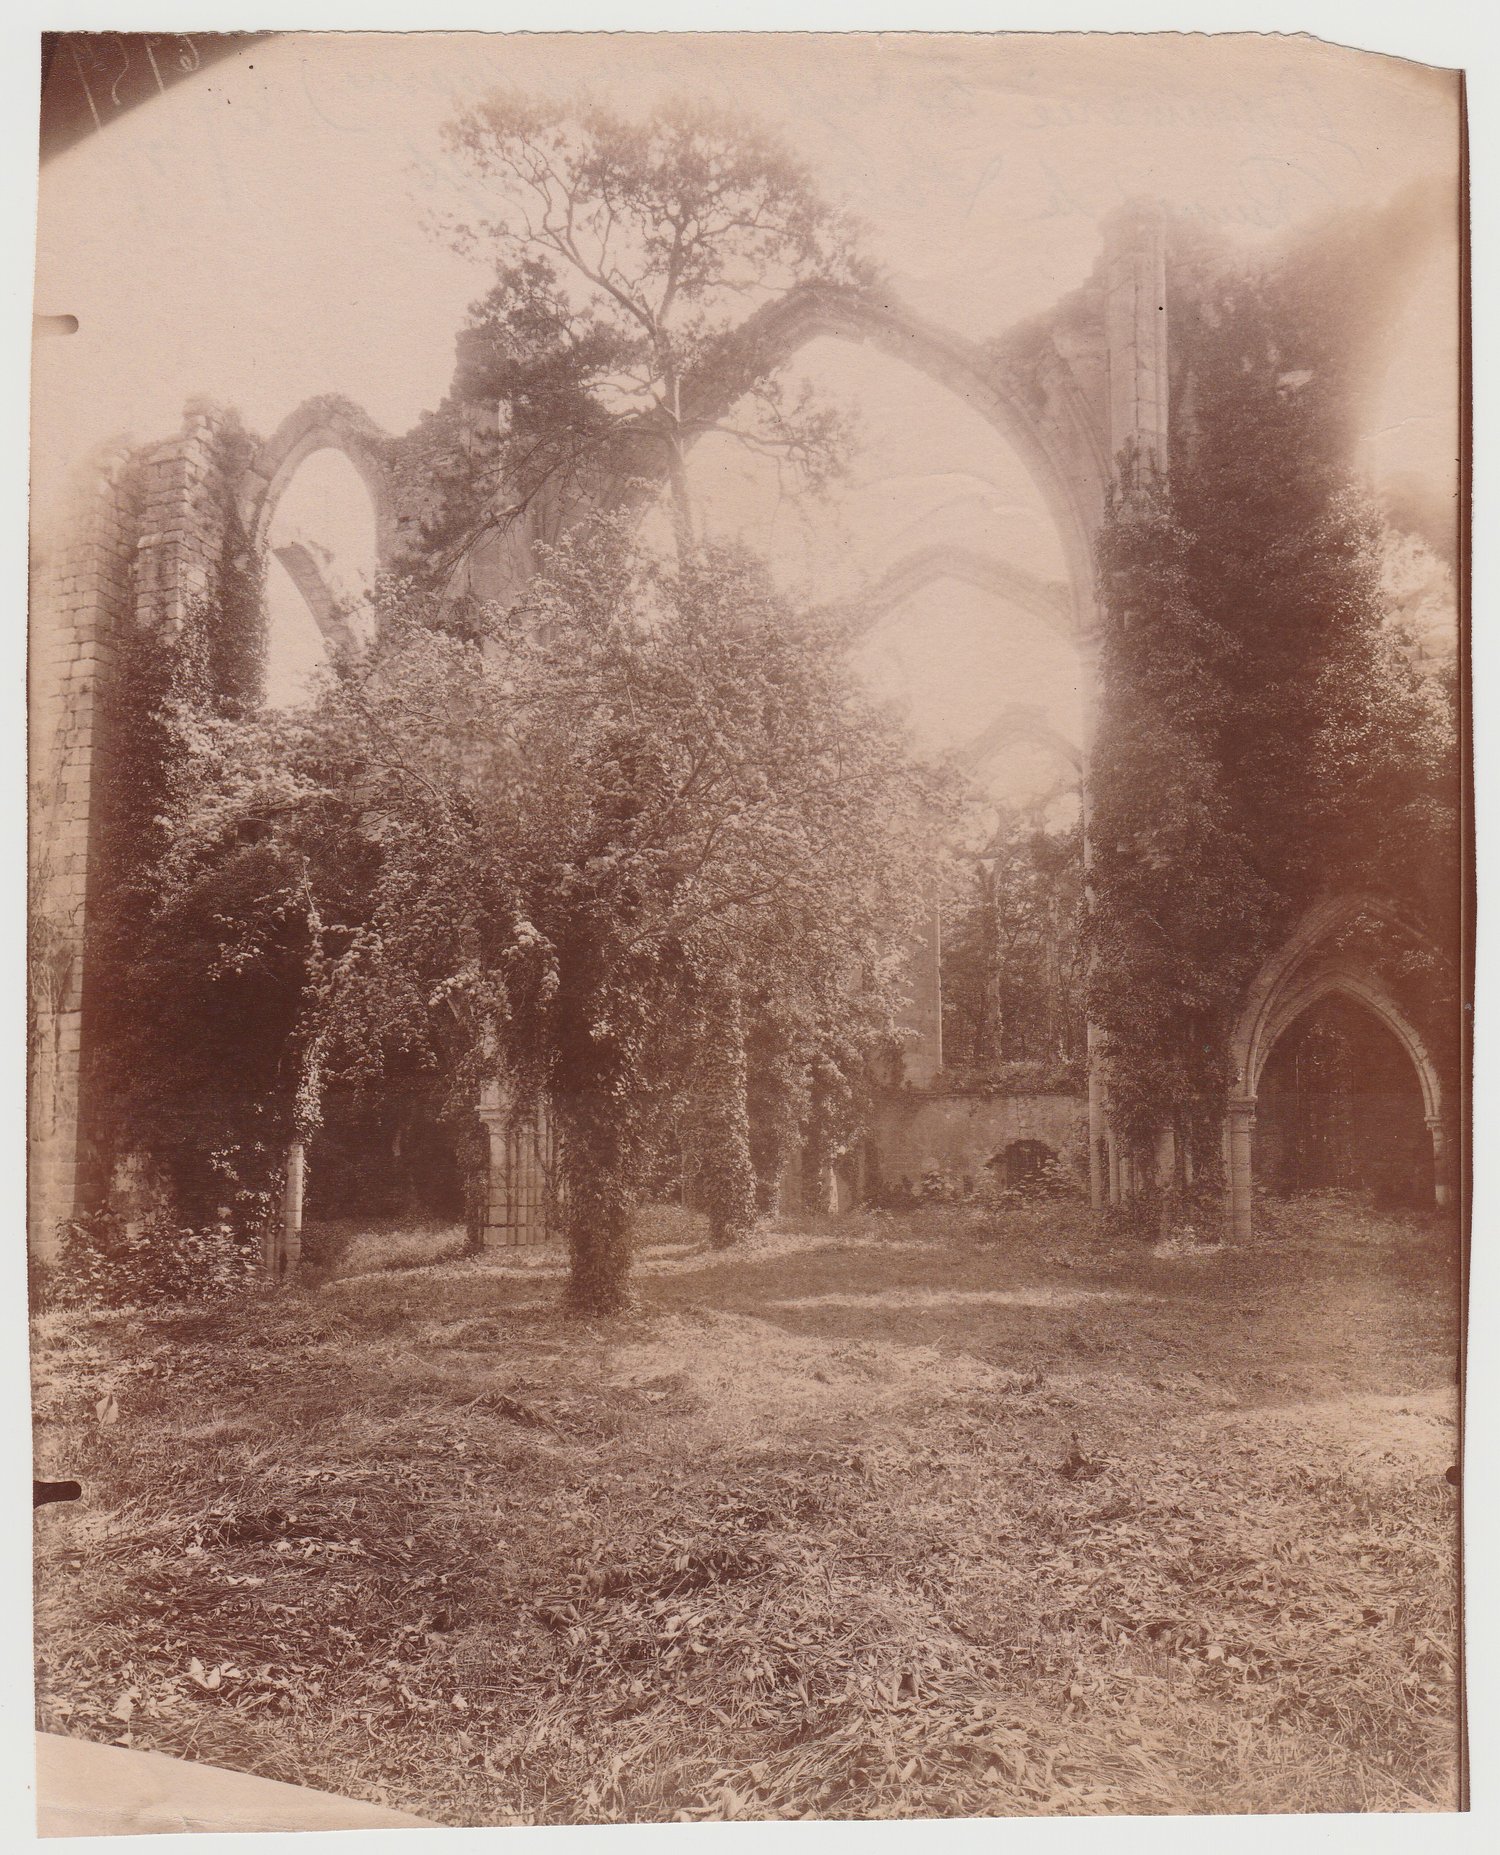 Image of Atget: the ruins of "l'Abbaye du Lys" at Dammarie-les-lys, ca. 1910